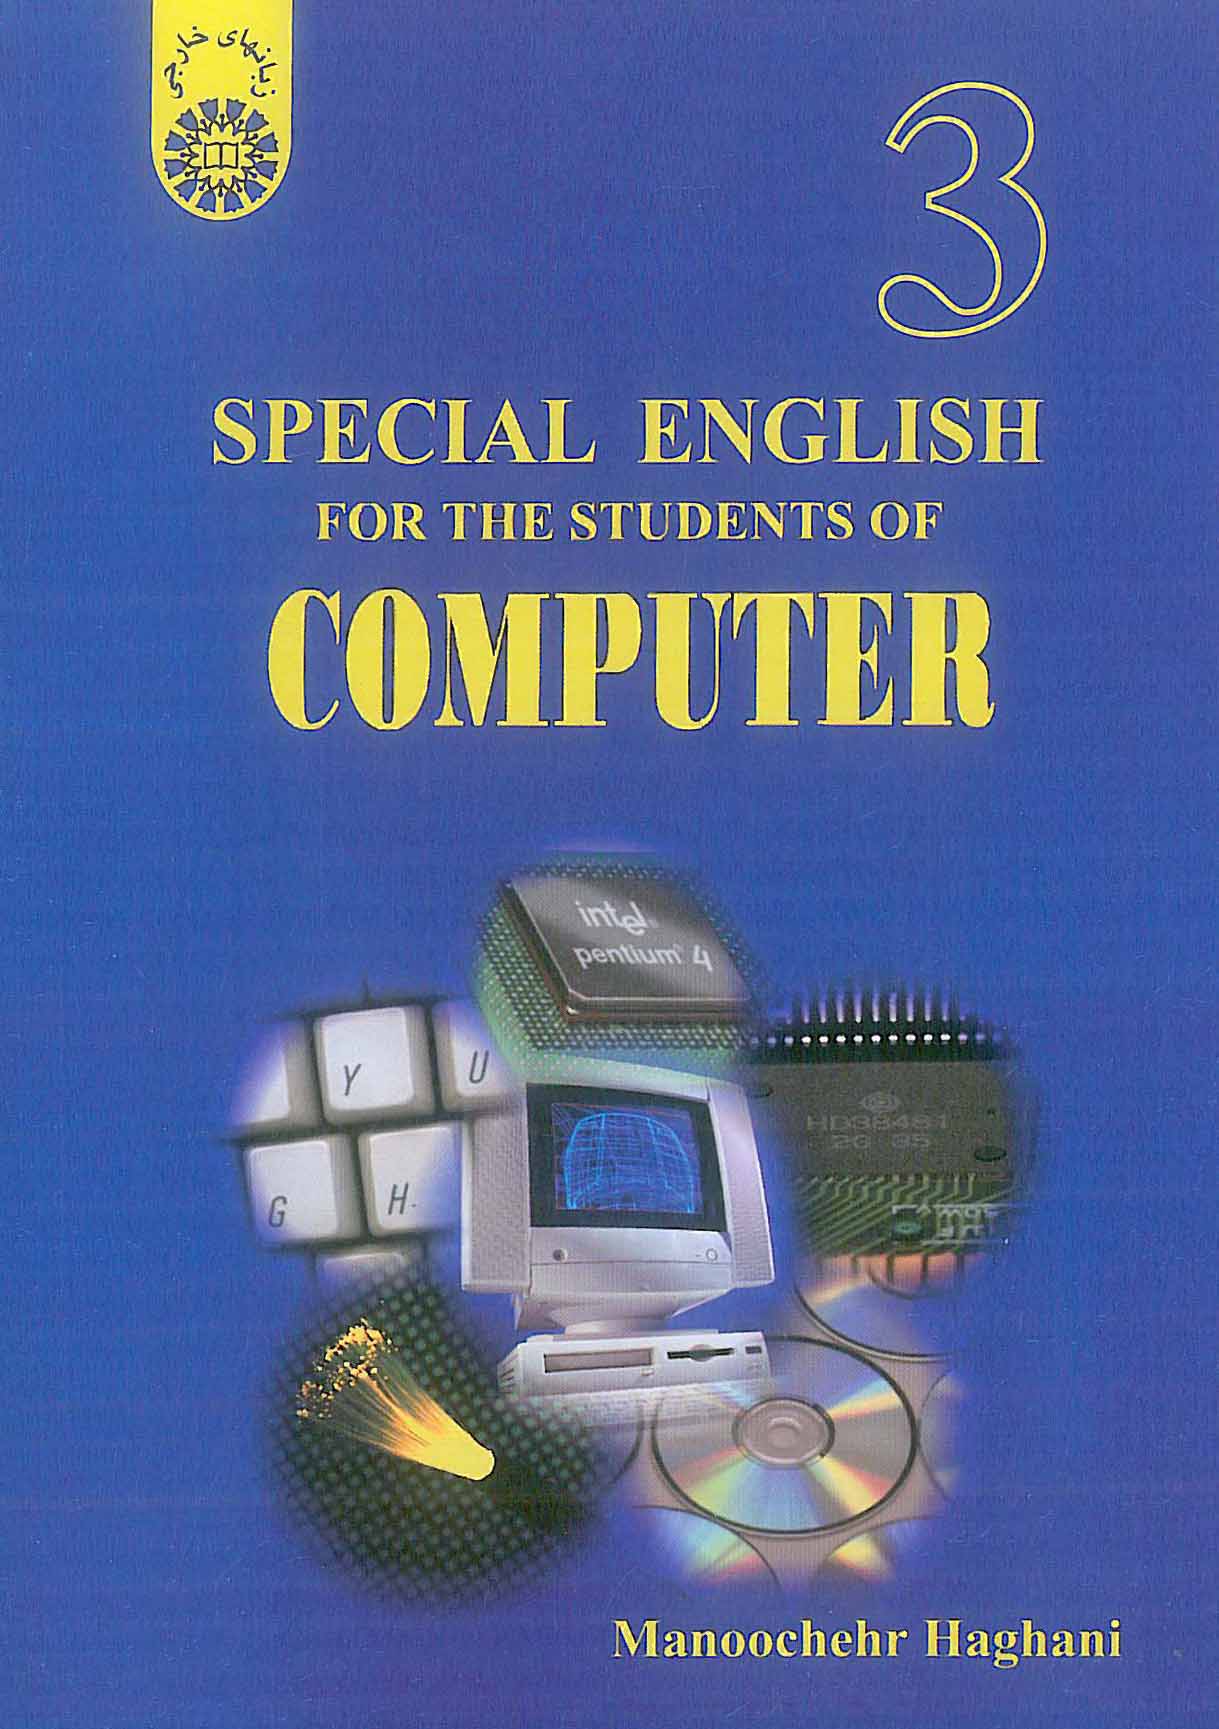 special English for the students of computer